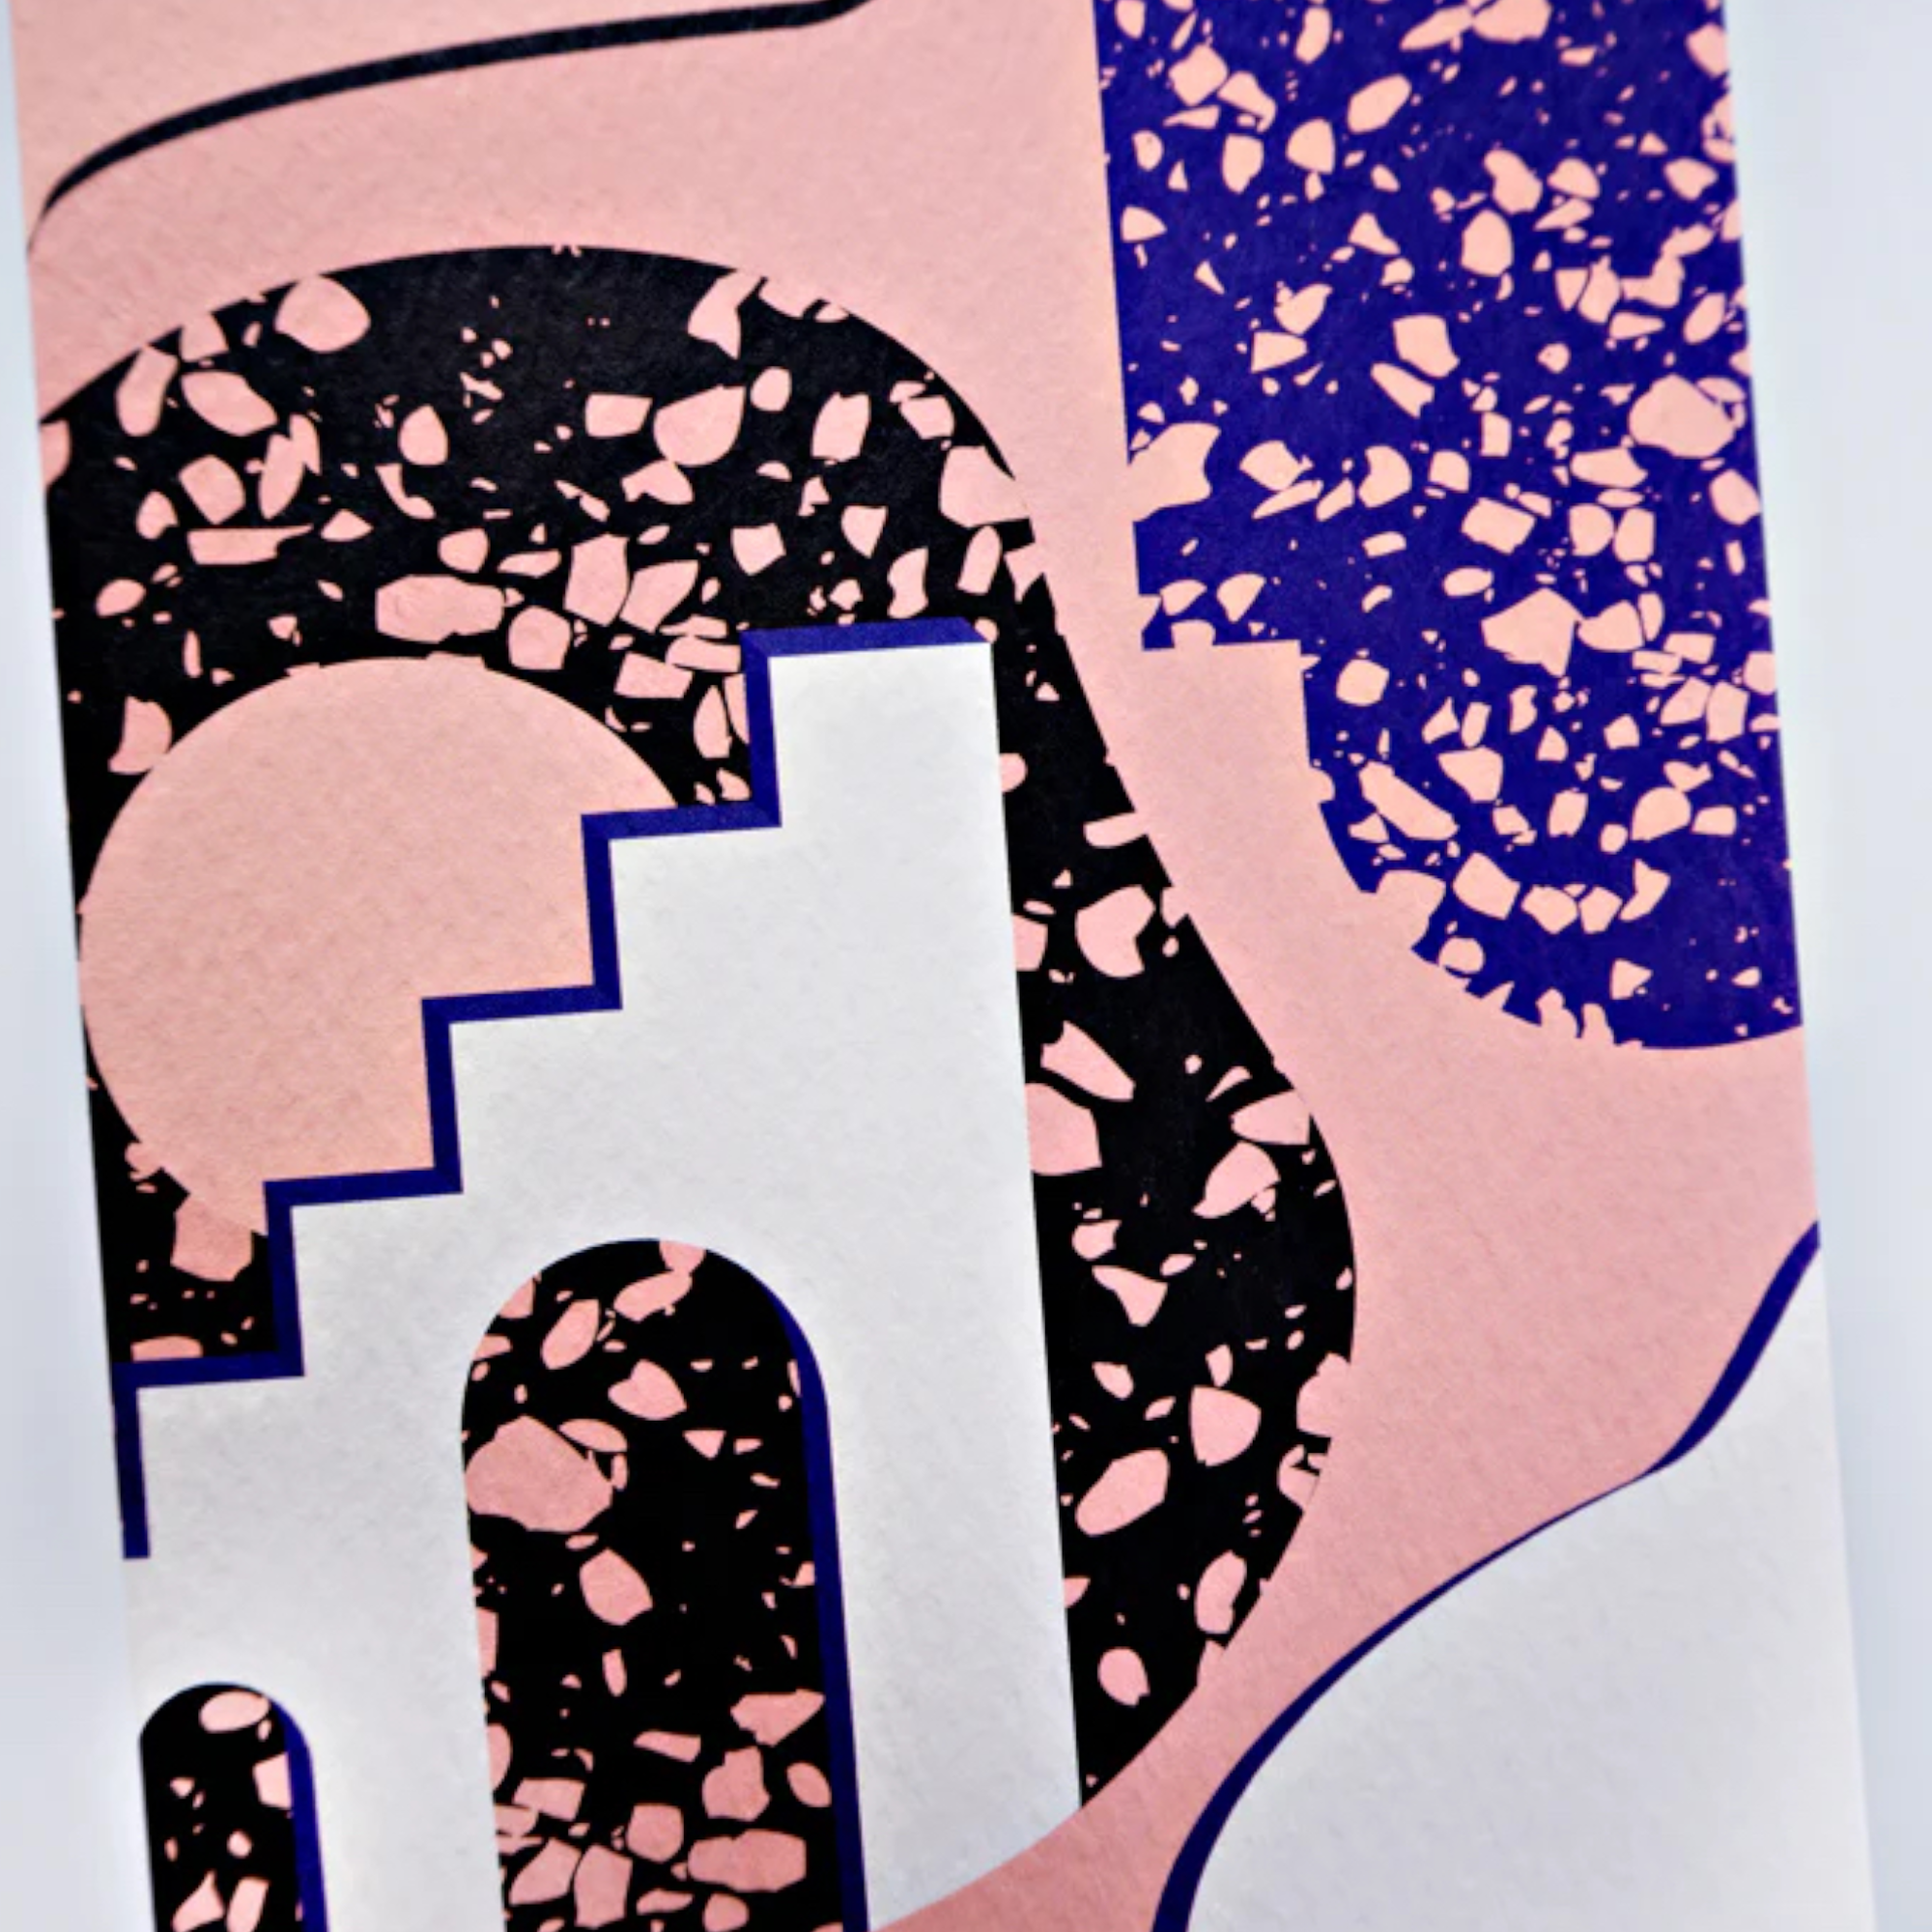 MIRRORS ART CARD Mirrors art card by The Completist. This abstract architectural terrazzo print card is perfect for sending a handwritten note, or to keep and frame as a mini print. It's blank on the inside so you can customise however you like - write the perfect message. A6 size card (10.5cm W x 14.8cm H), Printed in the UK on 300gsm Fresco Gesso FSC certified paper. Comes with a kraft envelope and is packed in a biodegradable film bag